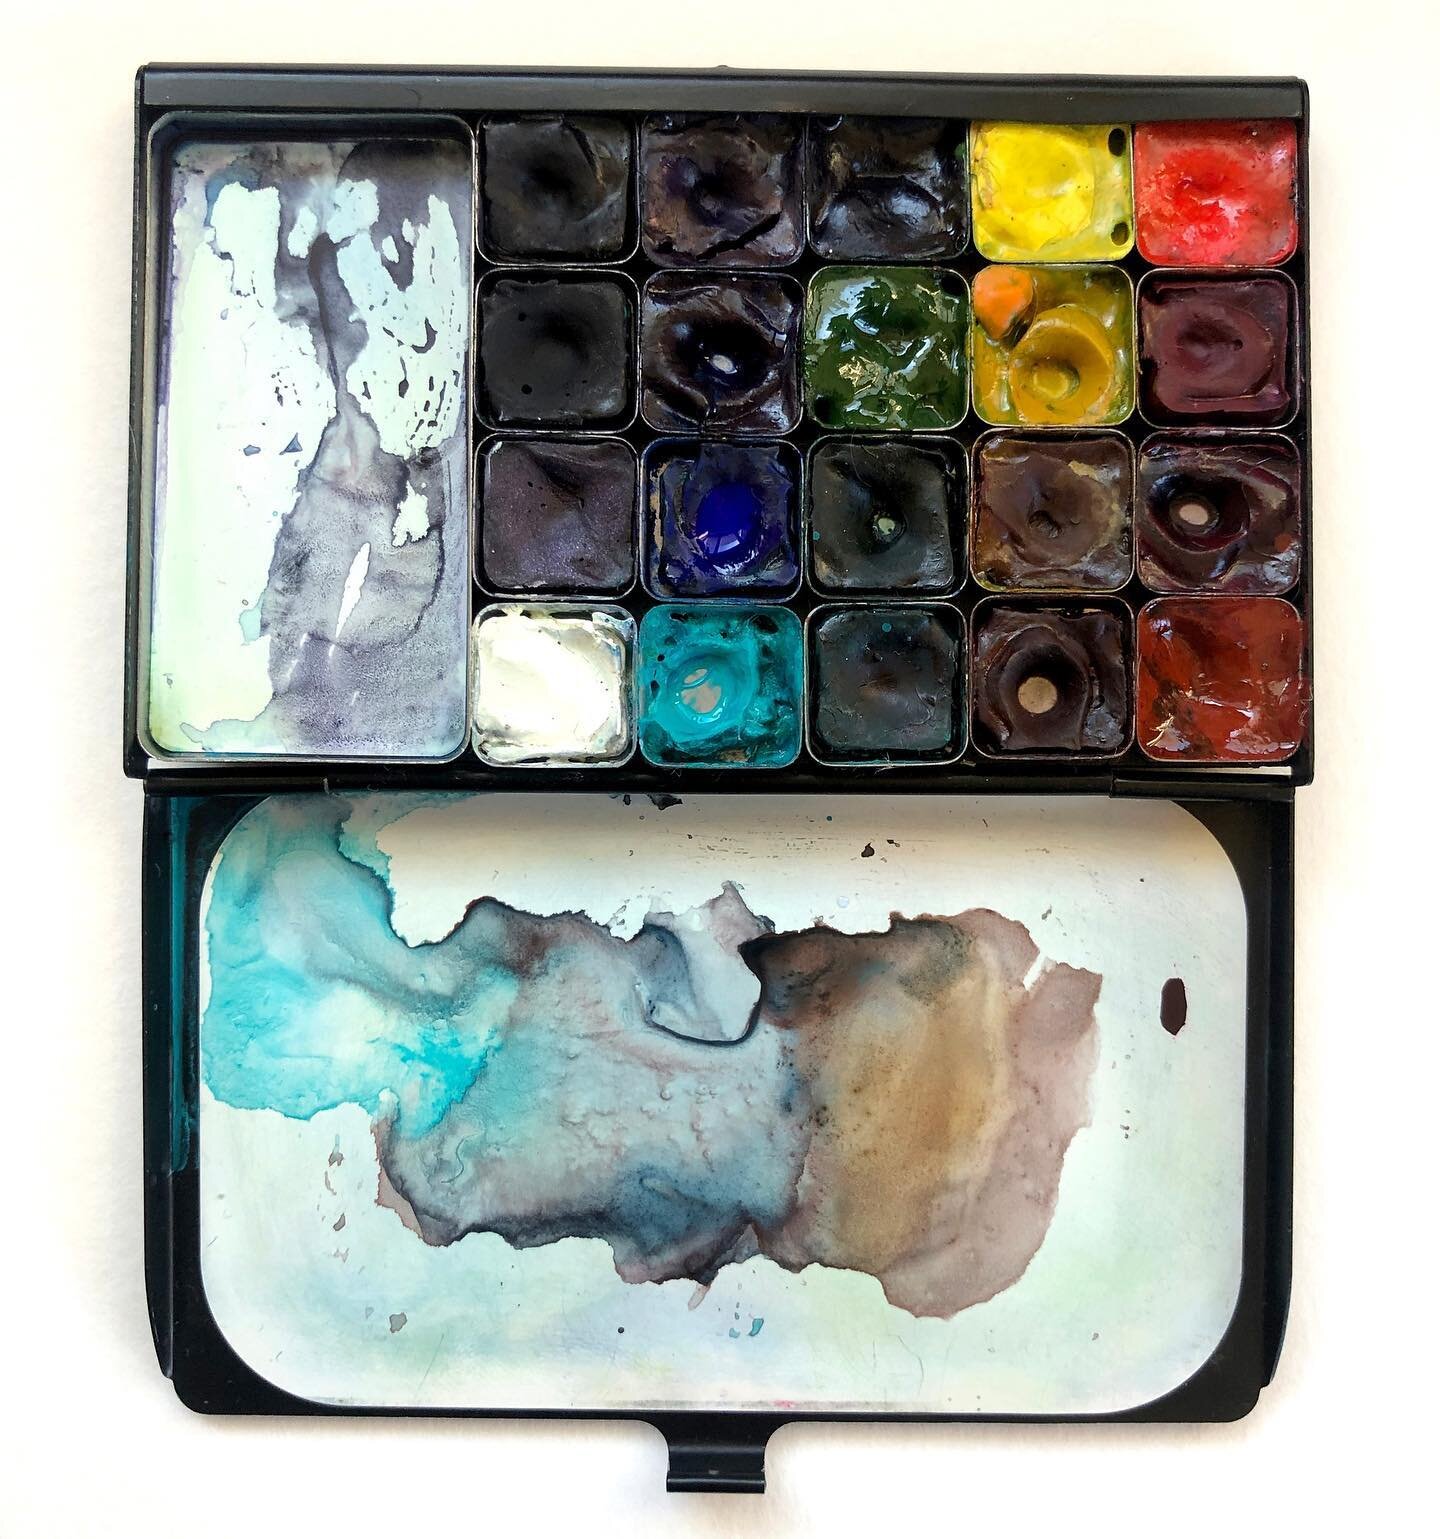 Having art tools that are portable, that you know well, and are easy to work with is essential for sketching more often. One of my favorite tools in the @arttoolkit that holds my watercolor paints. I have a big regular palette too, but I often just u